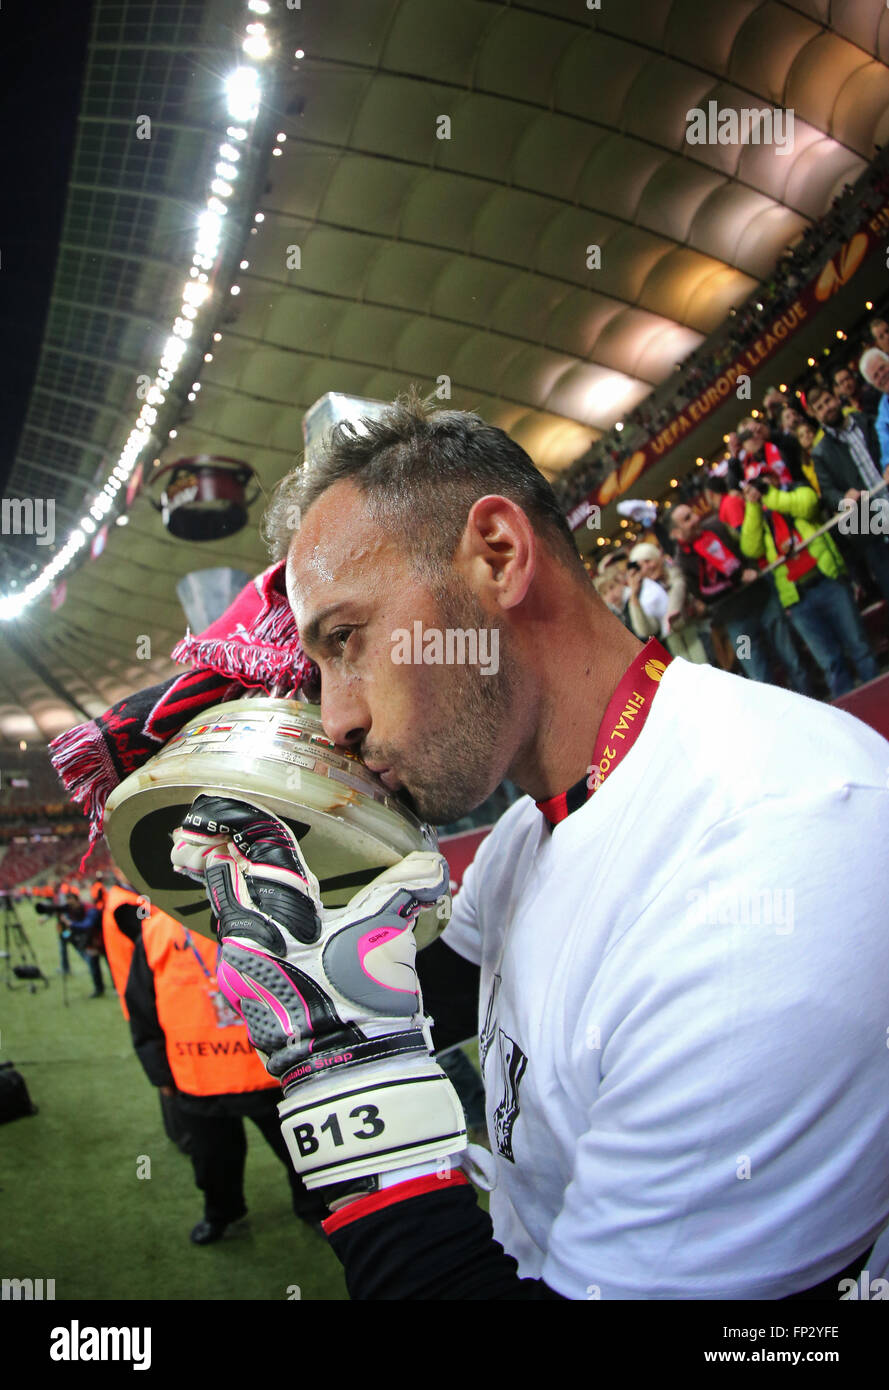 WARSAW, POLAND - MAY 27, 2015: Goalkeeper Beto of FC Sevilla kisses the UEFA Europa League Cup (Trophy) after the game against FC Dnipro at Warsaw National Stadium Stock Photo